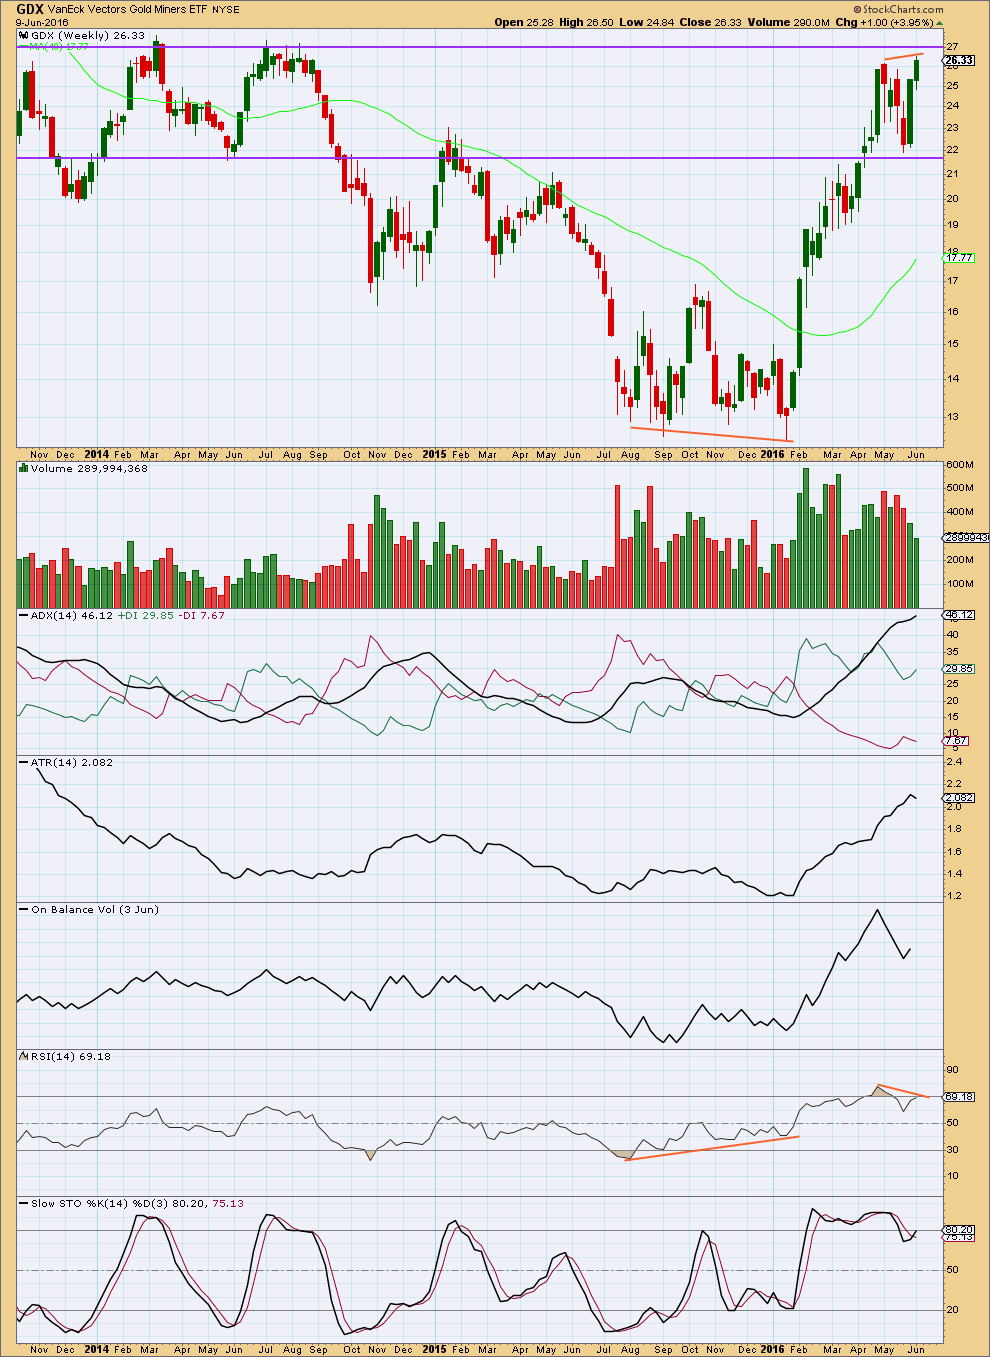 GDX weekly 2016